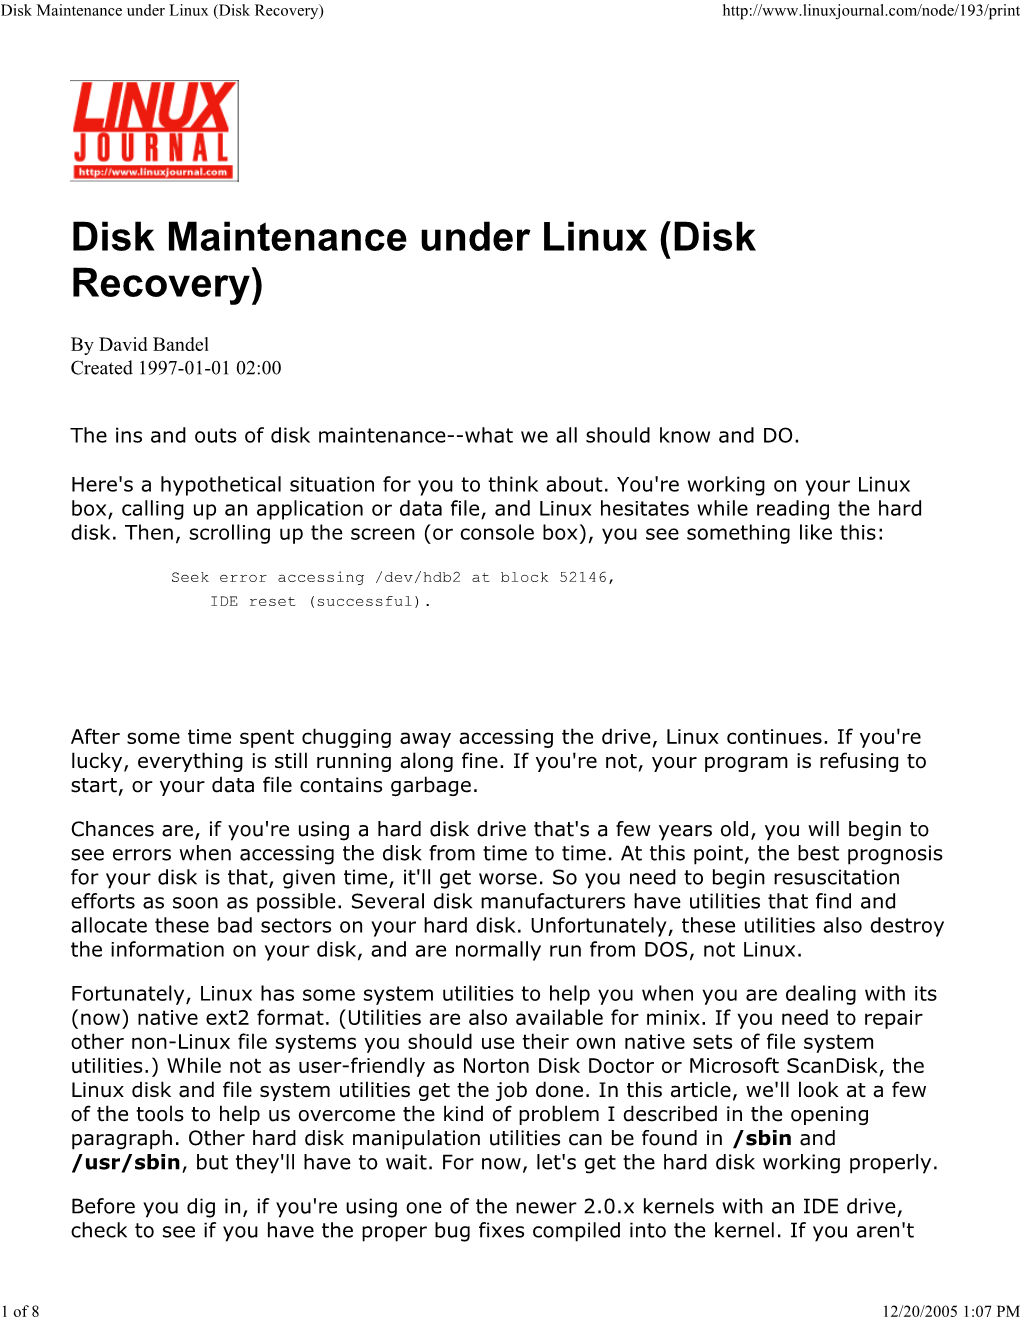 Disk Maintenance Under Linux (Disk Recovery)